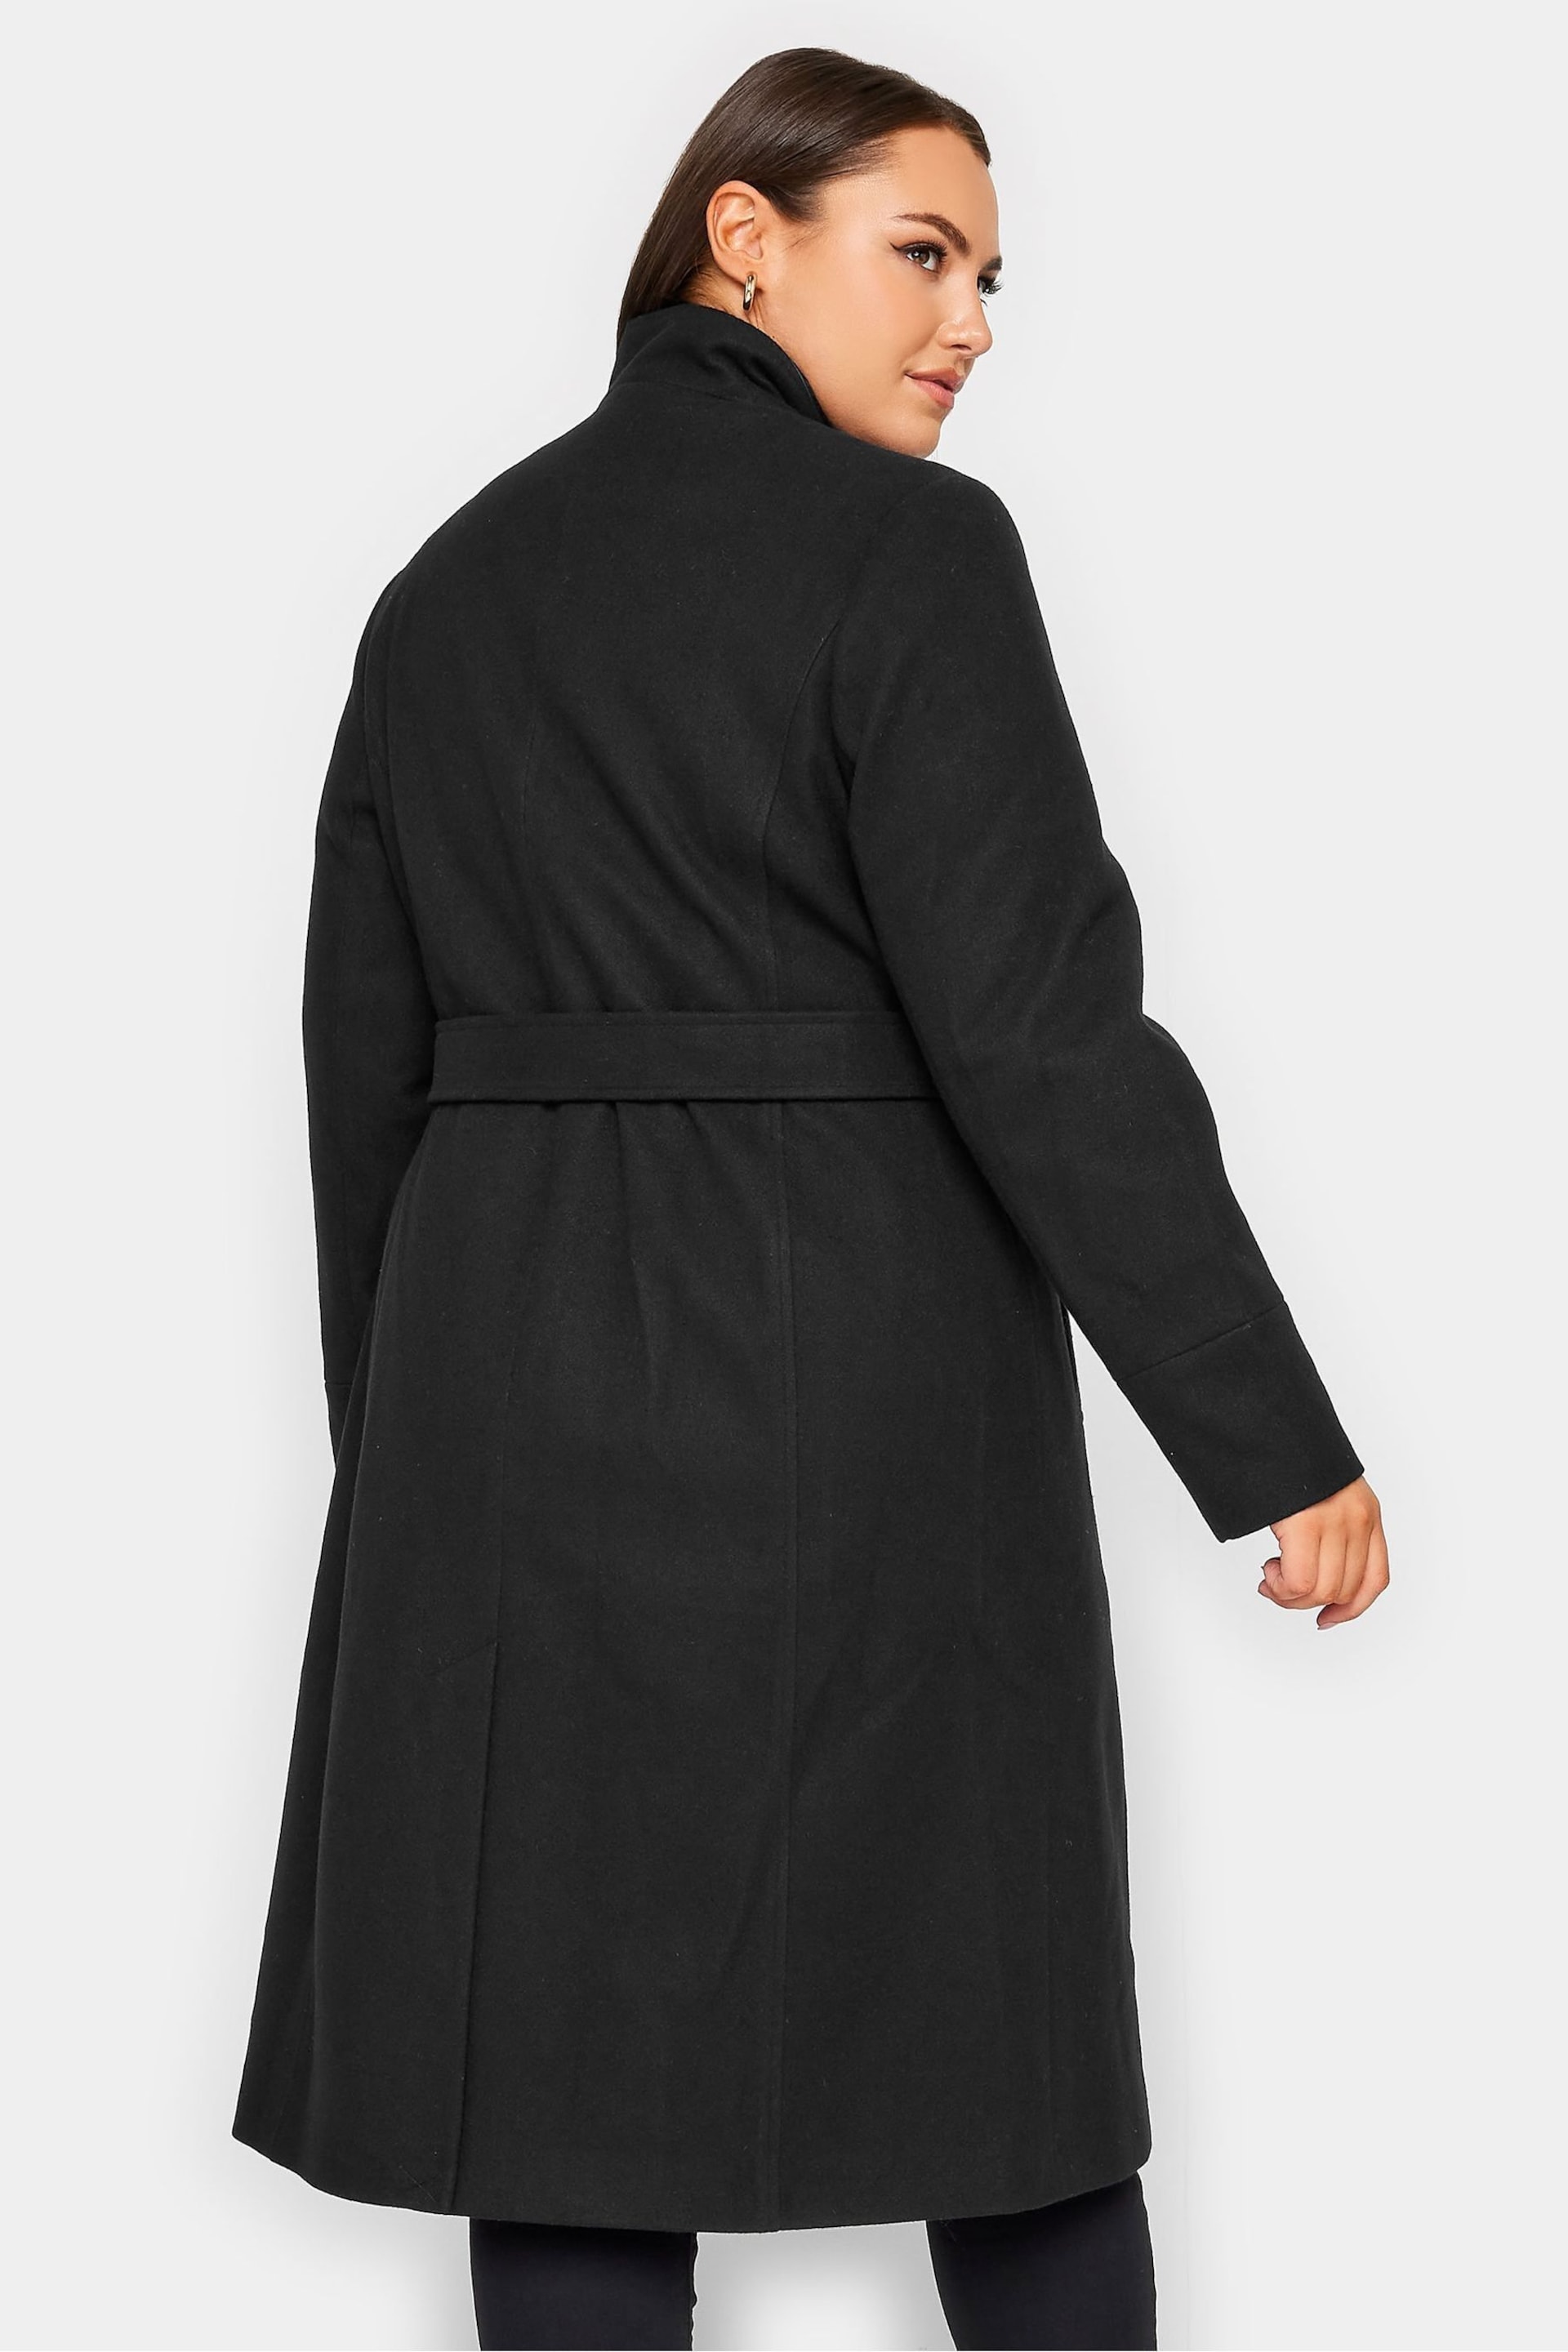 Yours Curve Black Belted Military Coat - Image 4 of 5